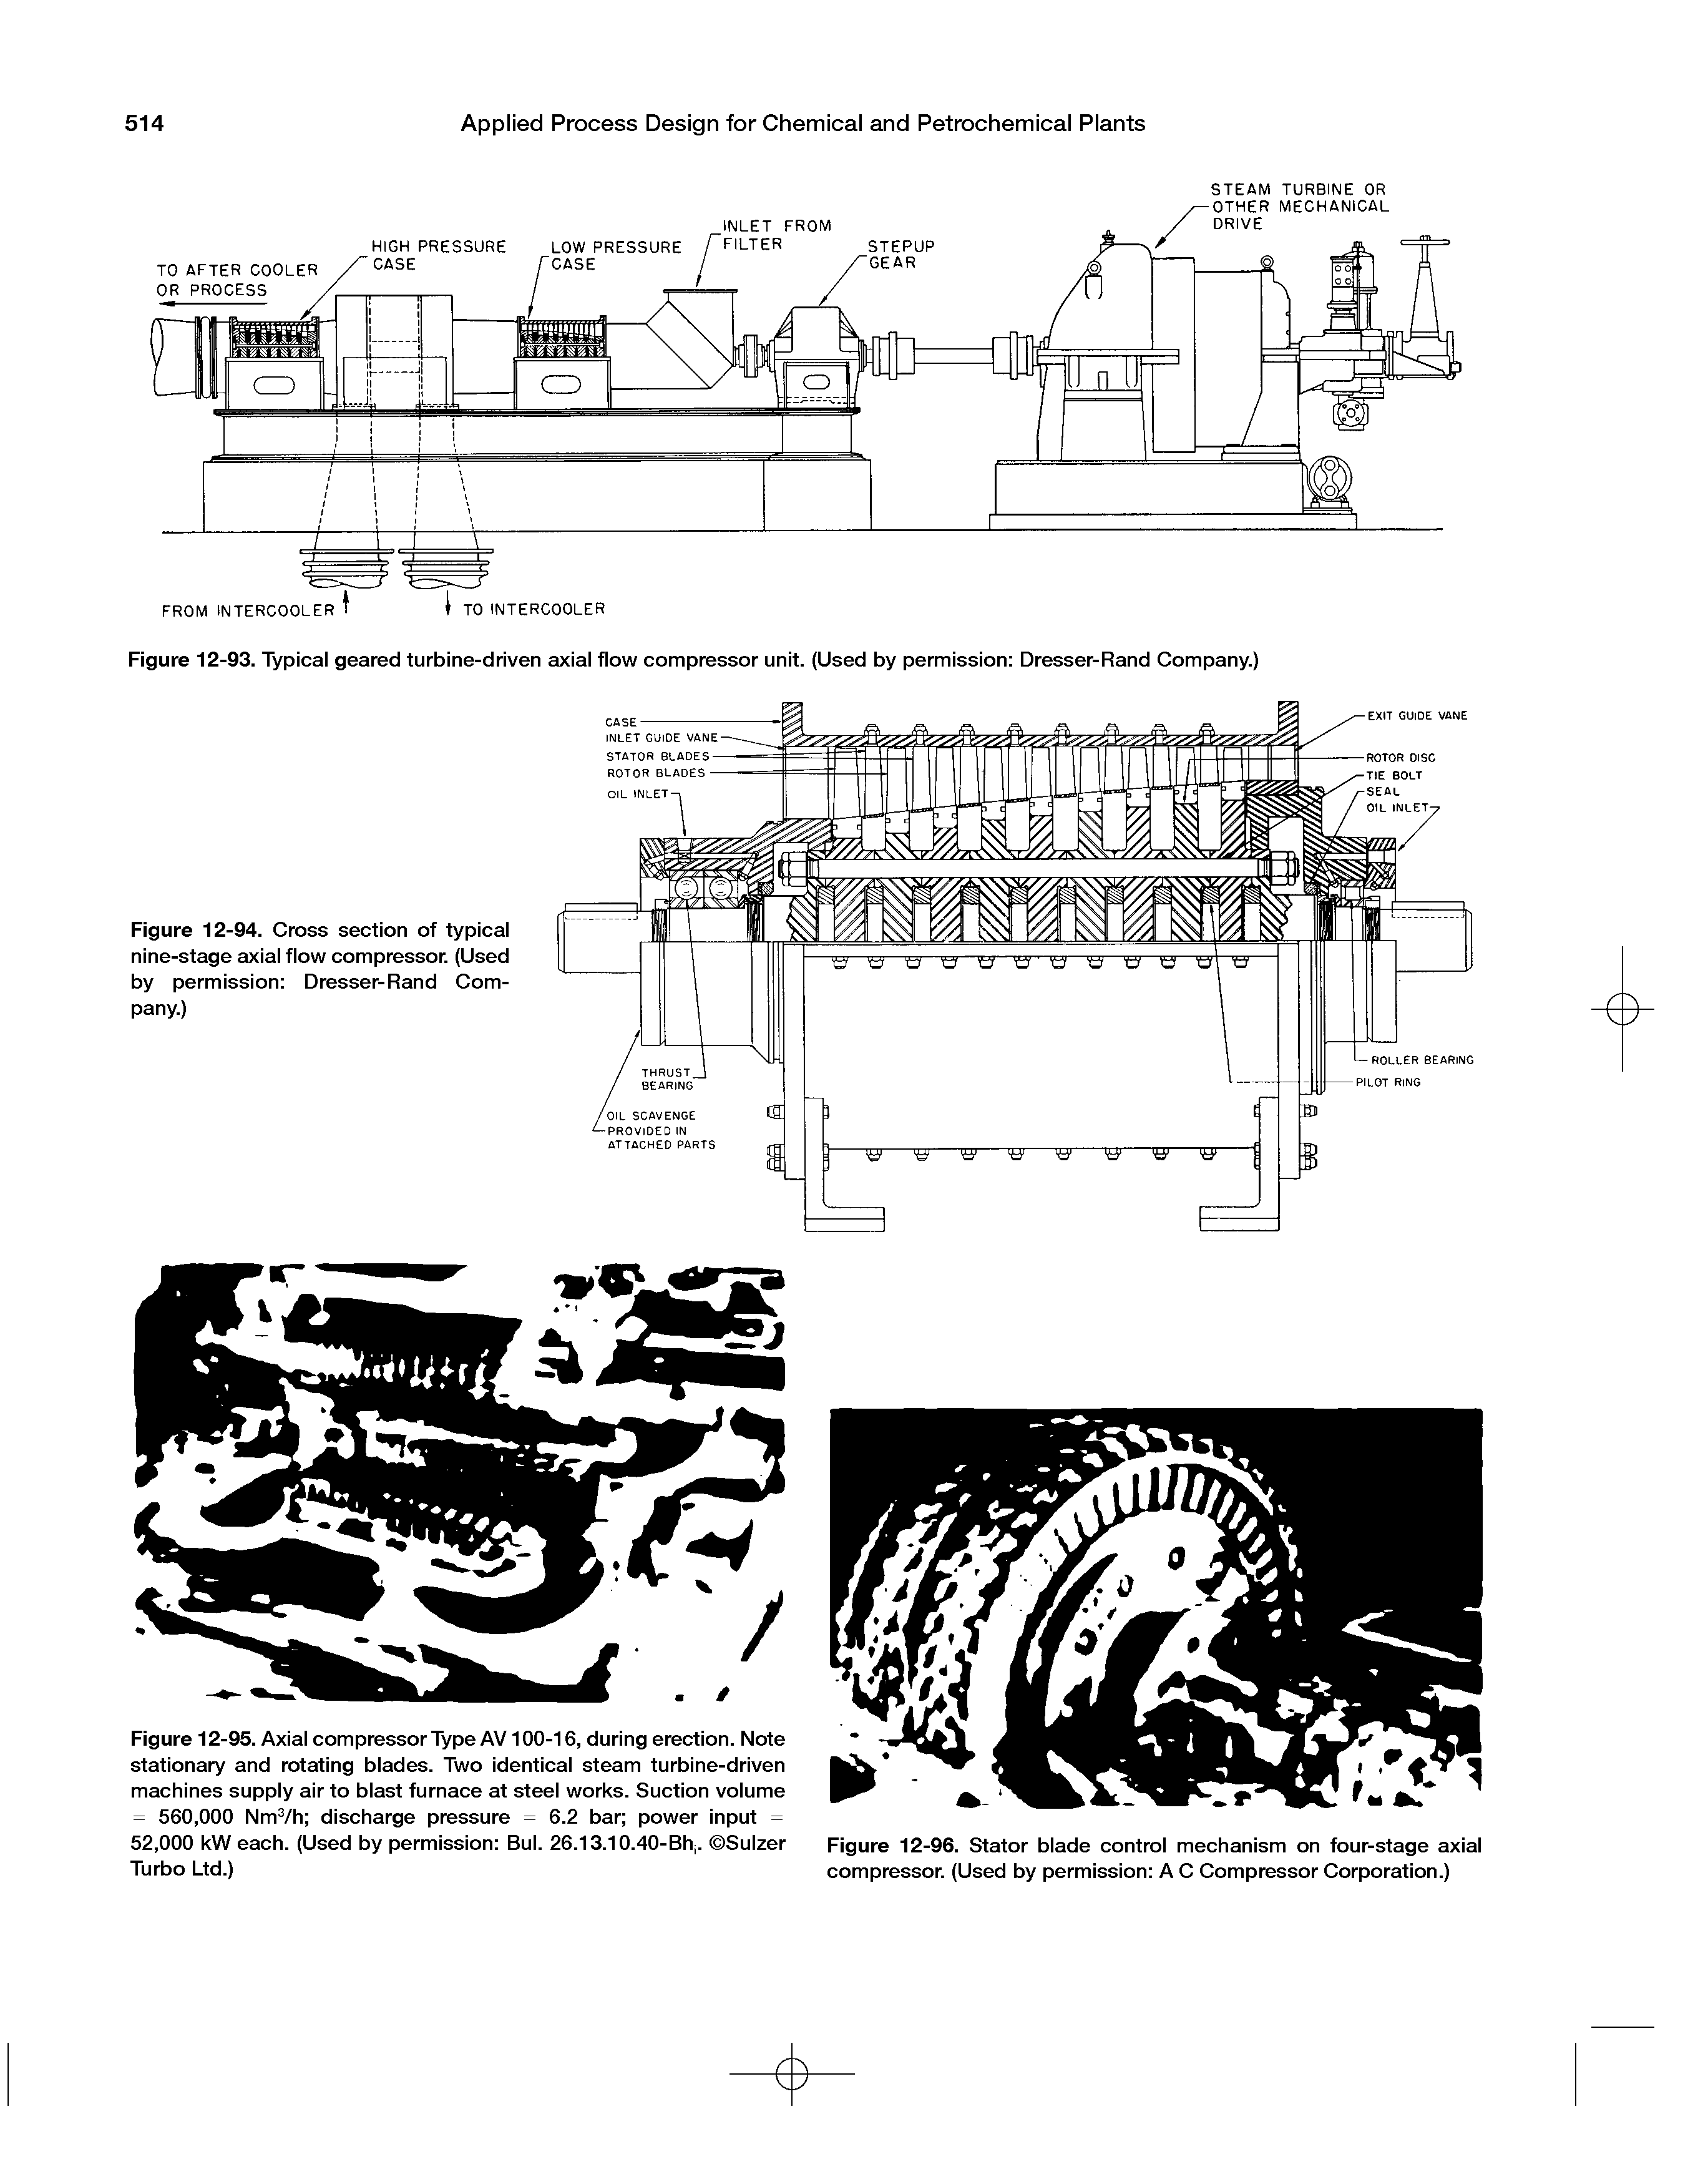 Figure 12-95. Axial compressor Type AV100-16, during erection. Note stationary and rotating blades. Two identical steam turbine-driven machines supply air to blast furnace at steel works. Suction volume = 560,000 NmVh discharge pressure = 6.2 bar power input = 52,000 kW each. (Used by permission Bui. 26.13.10.40-Bhj. Sulzer Turbo Ltd.)...